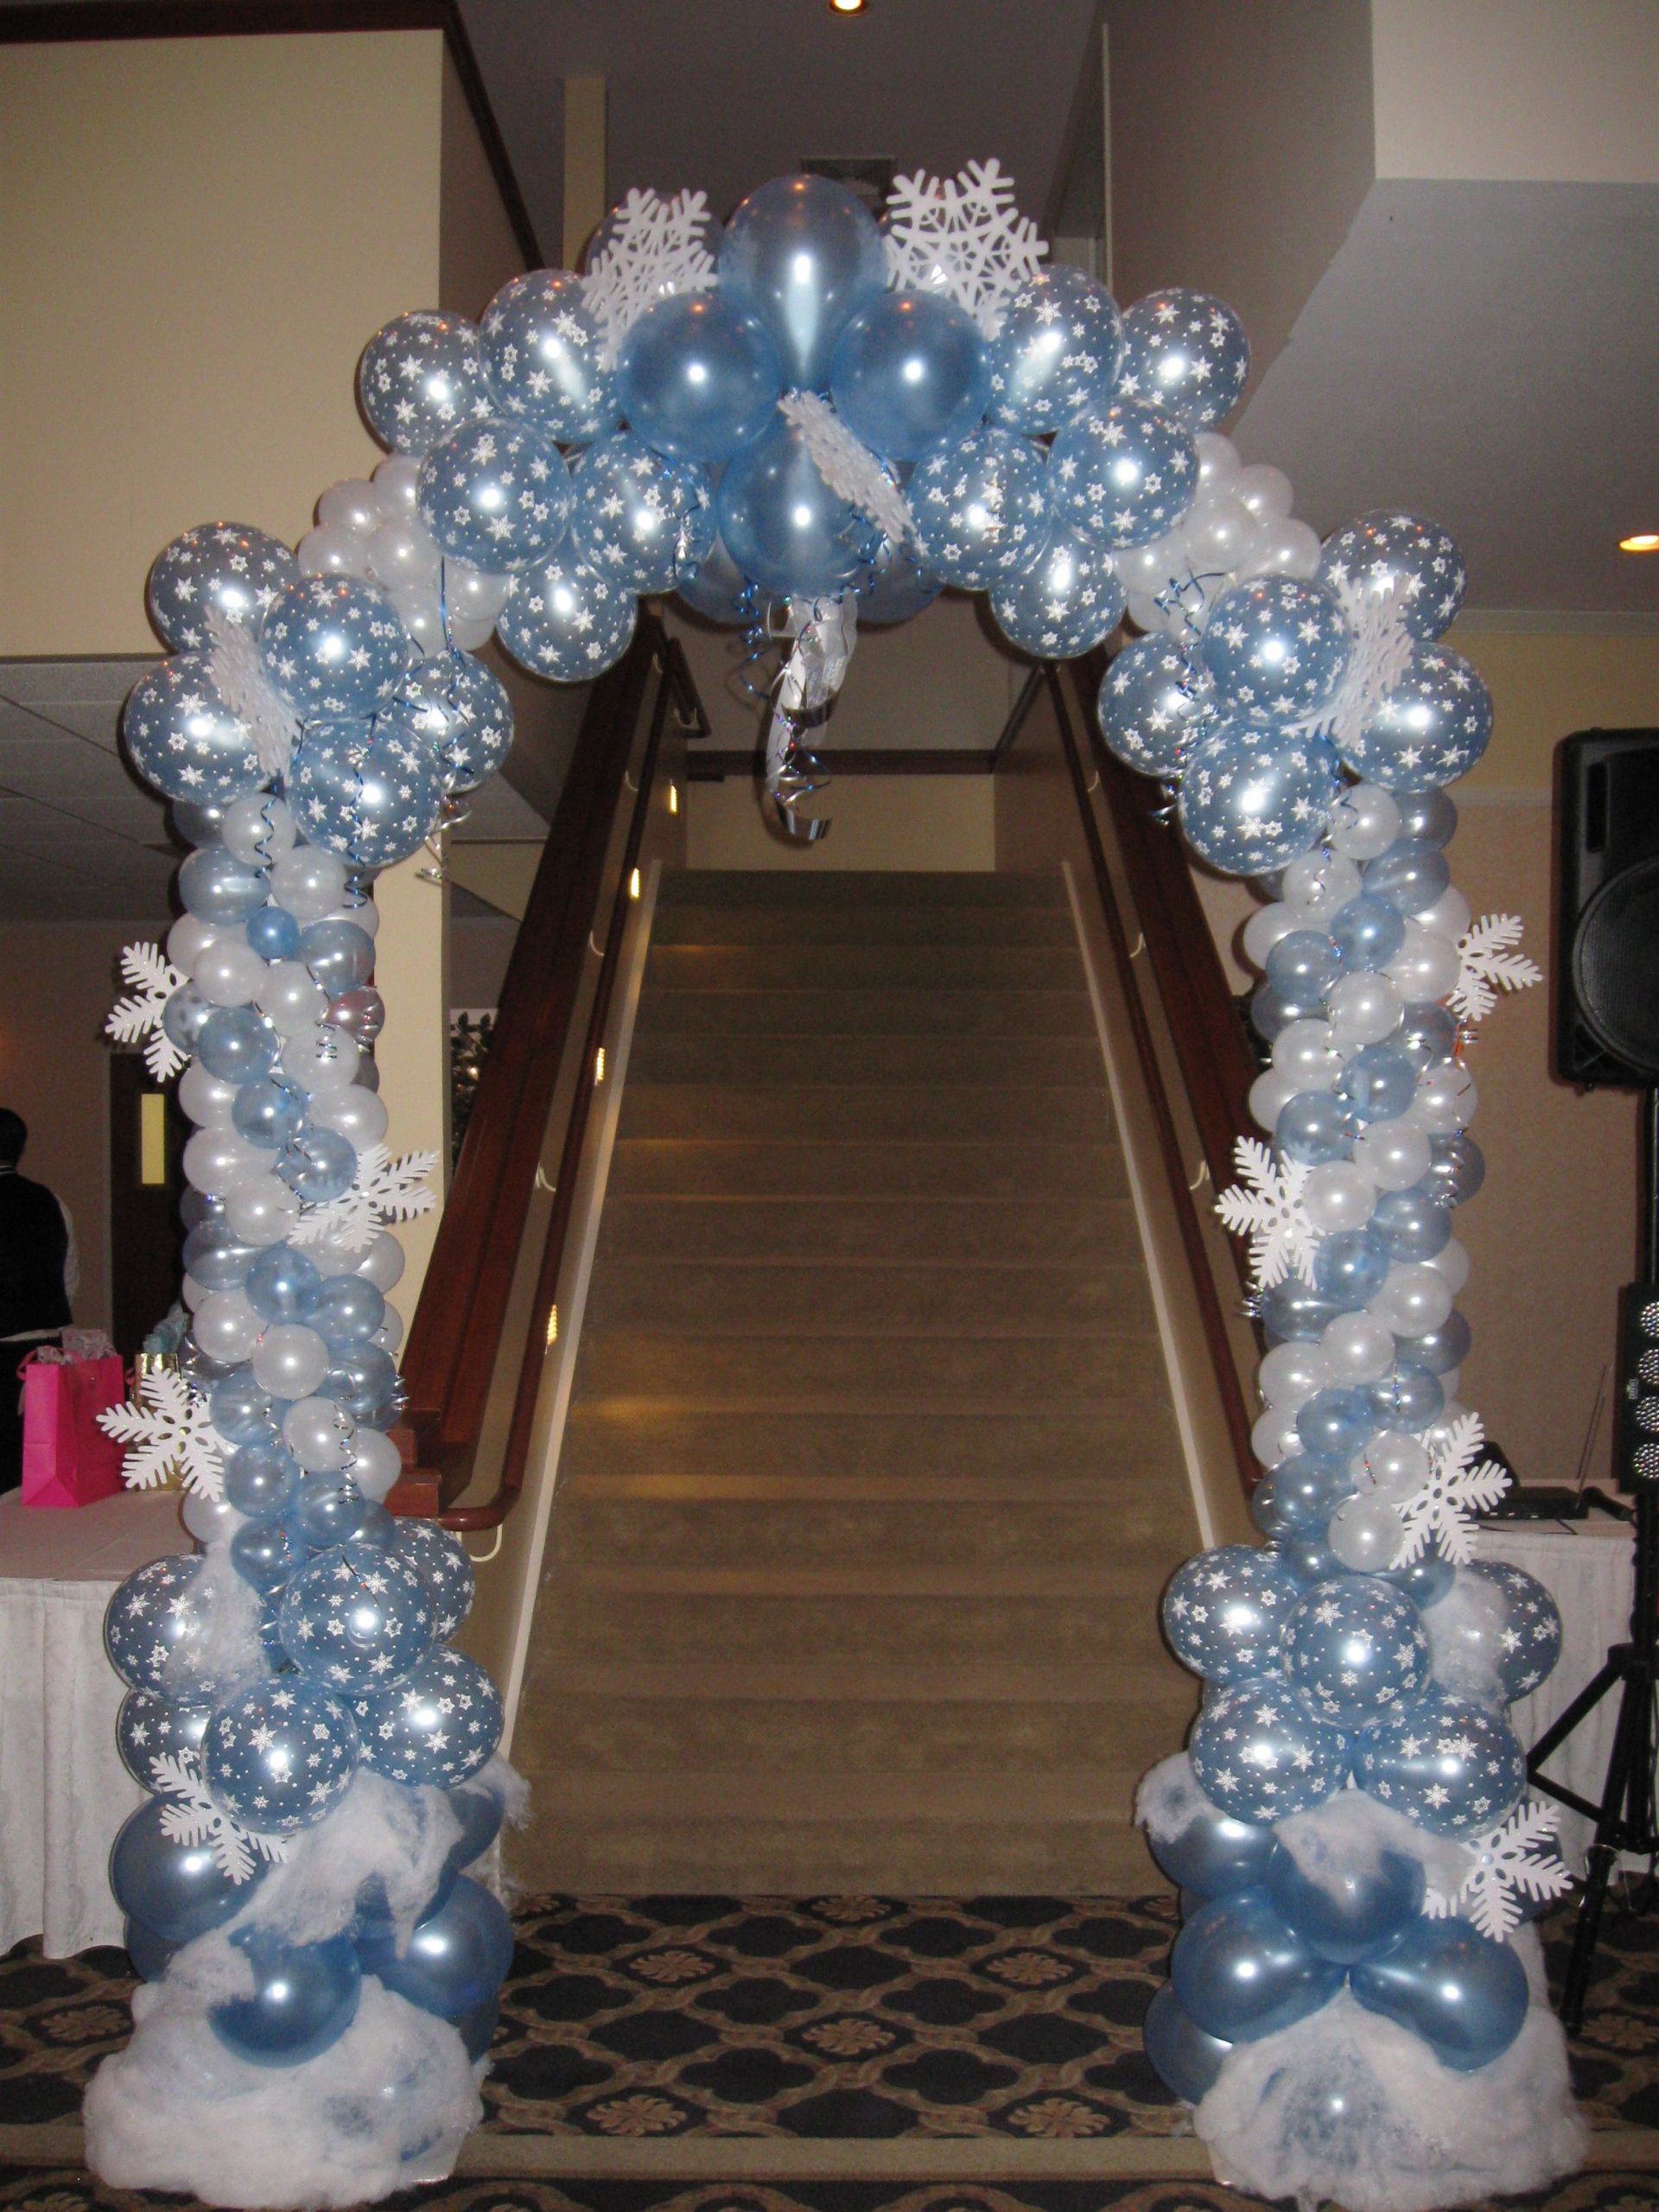 Winter Wonderland Christmas Party Theme Ideas
 Snowy Winter Arch in 2019